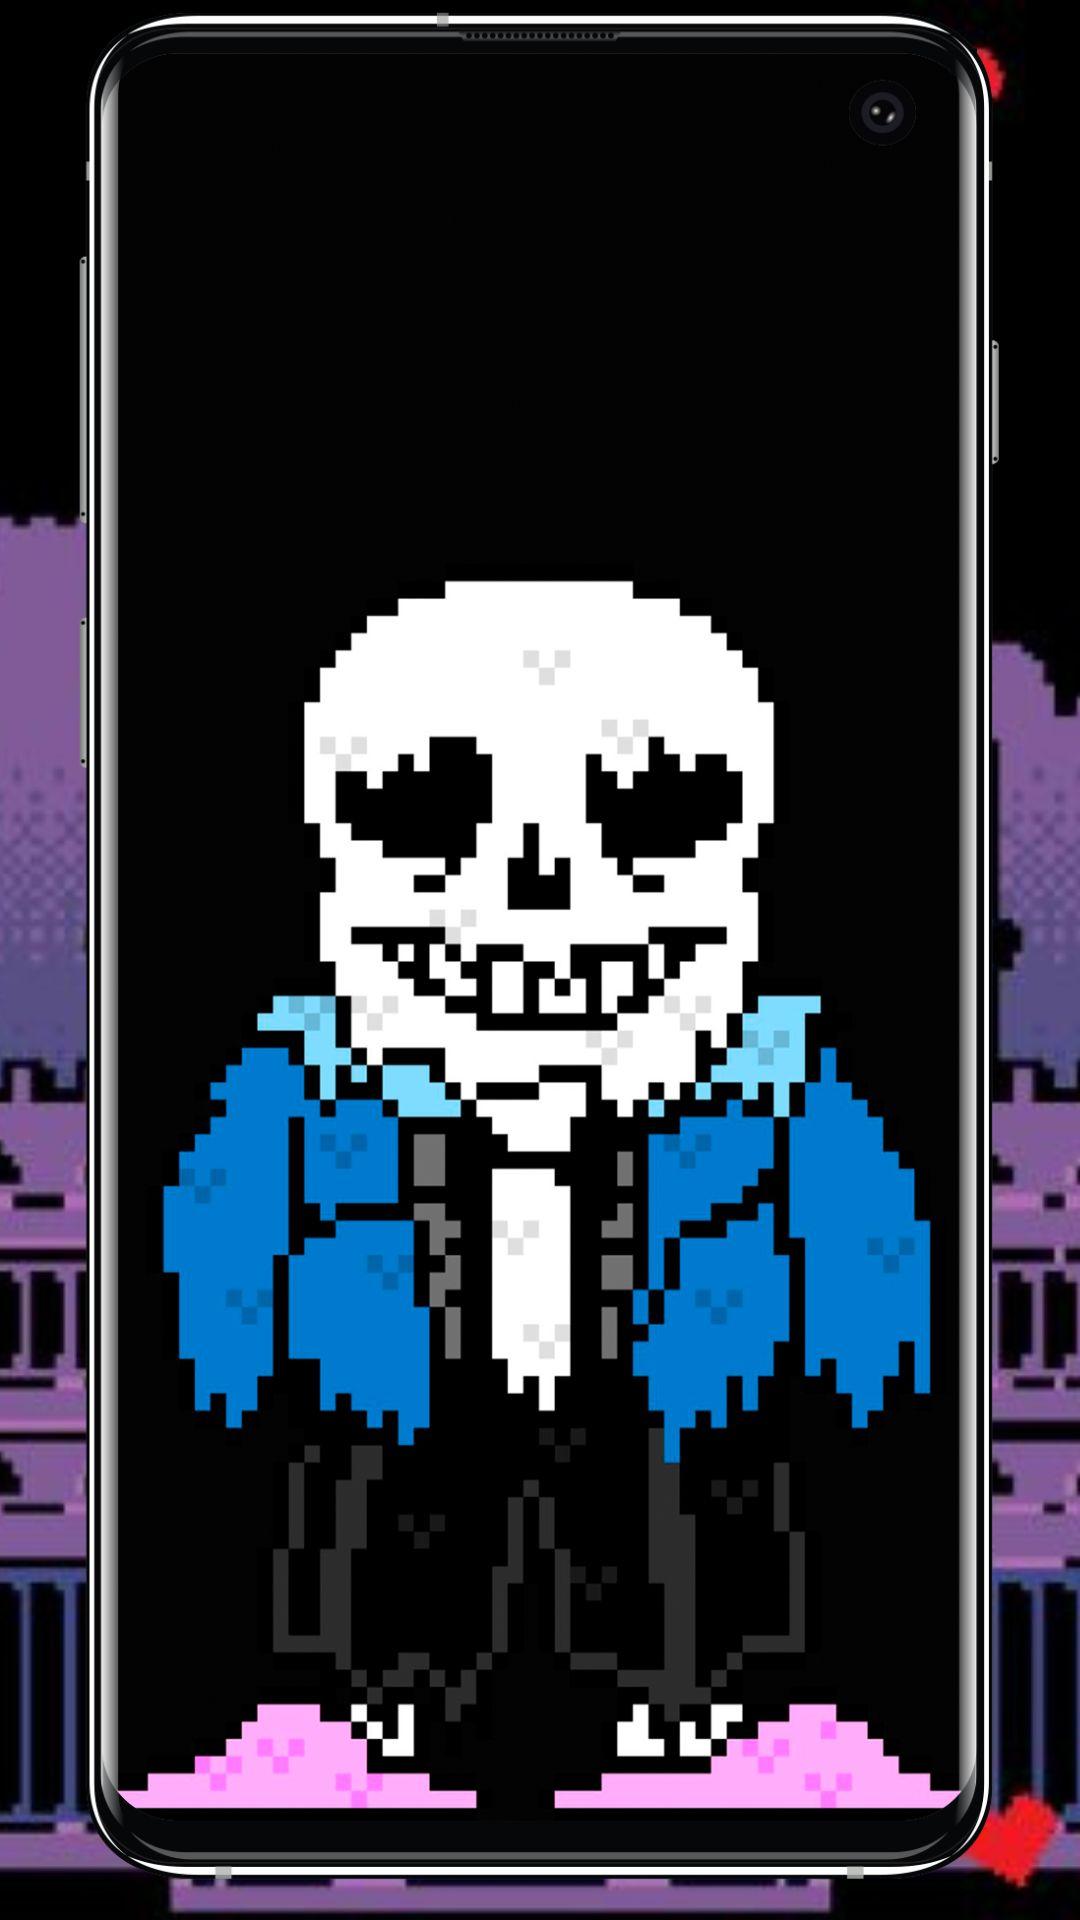 Undertale Sans Wallpaper HD APK for Android Download